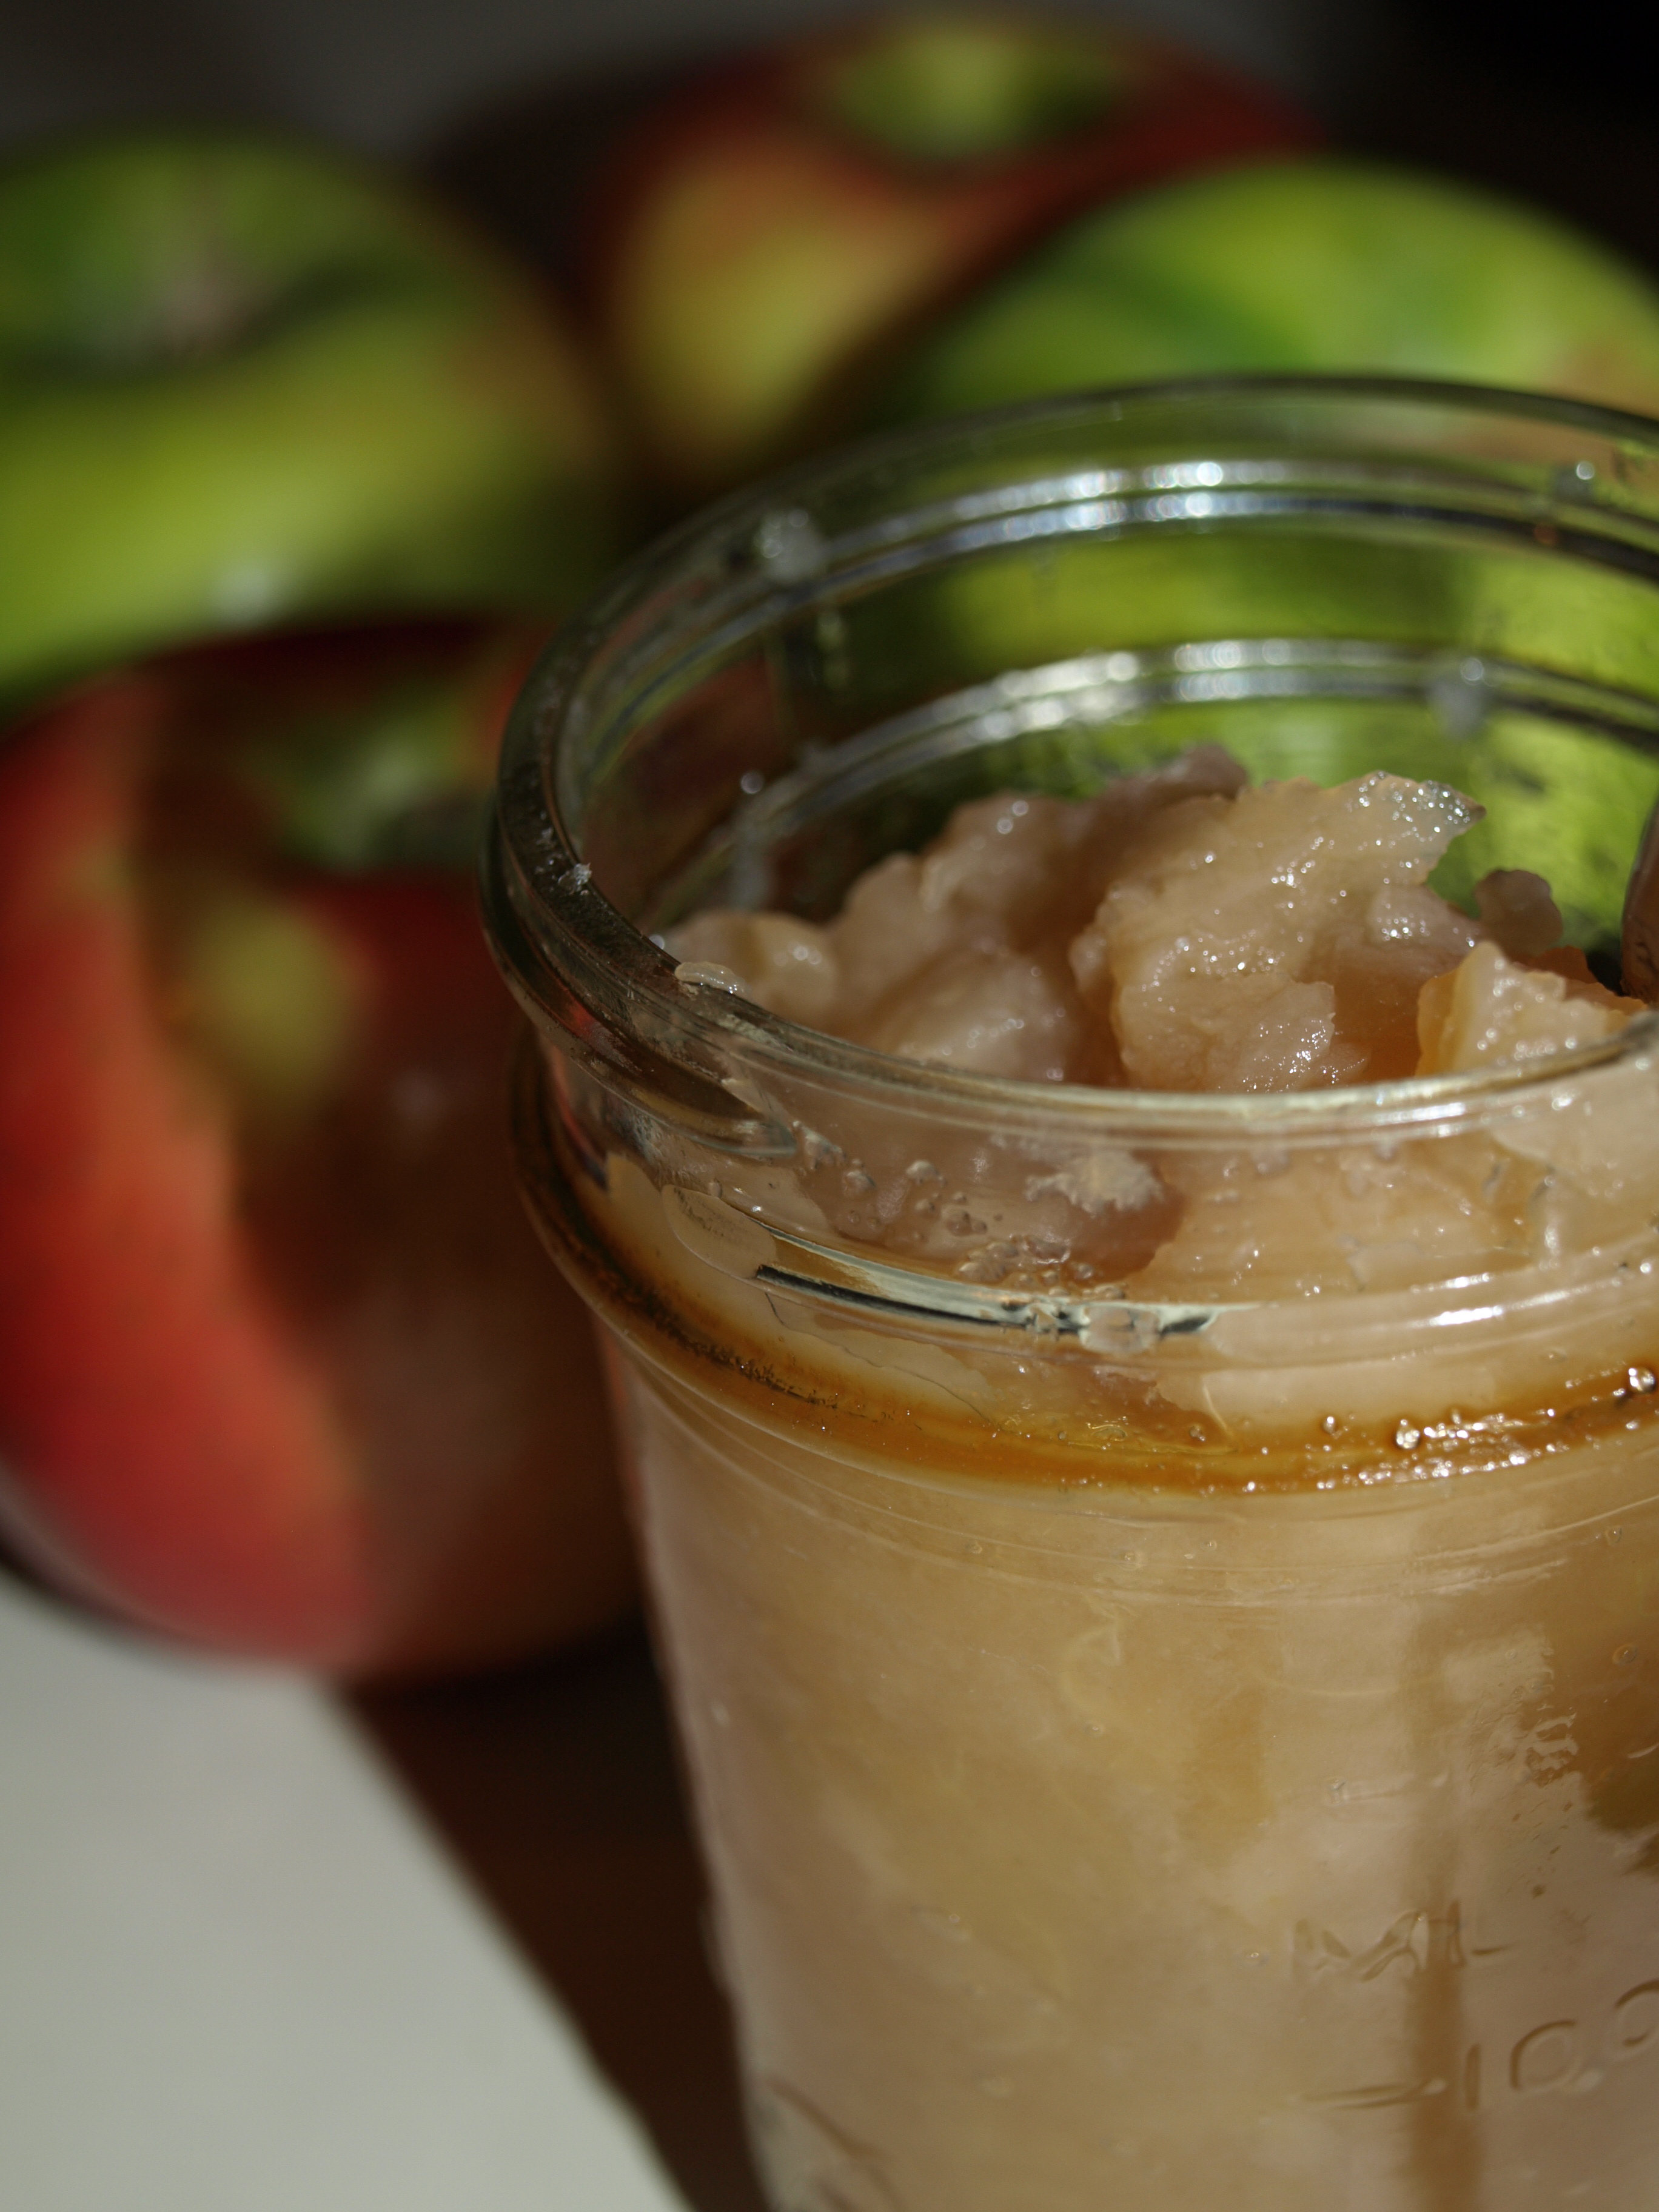 applesauce and apples